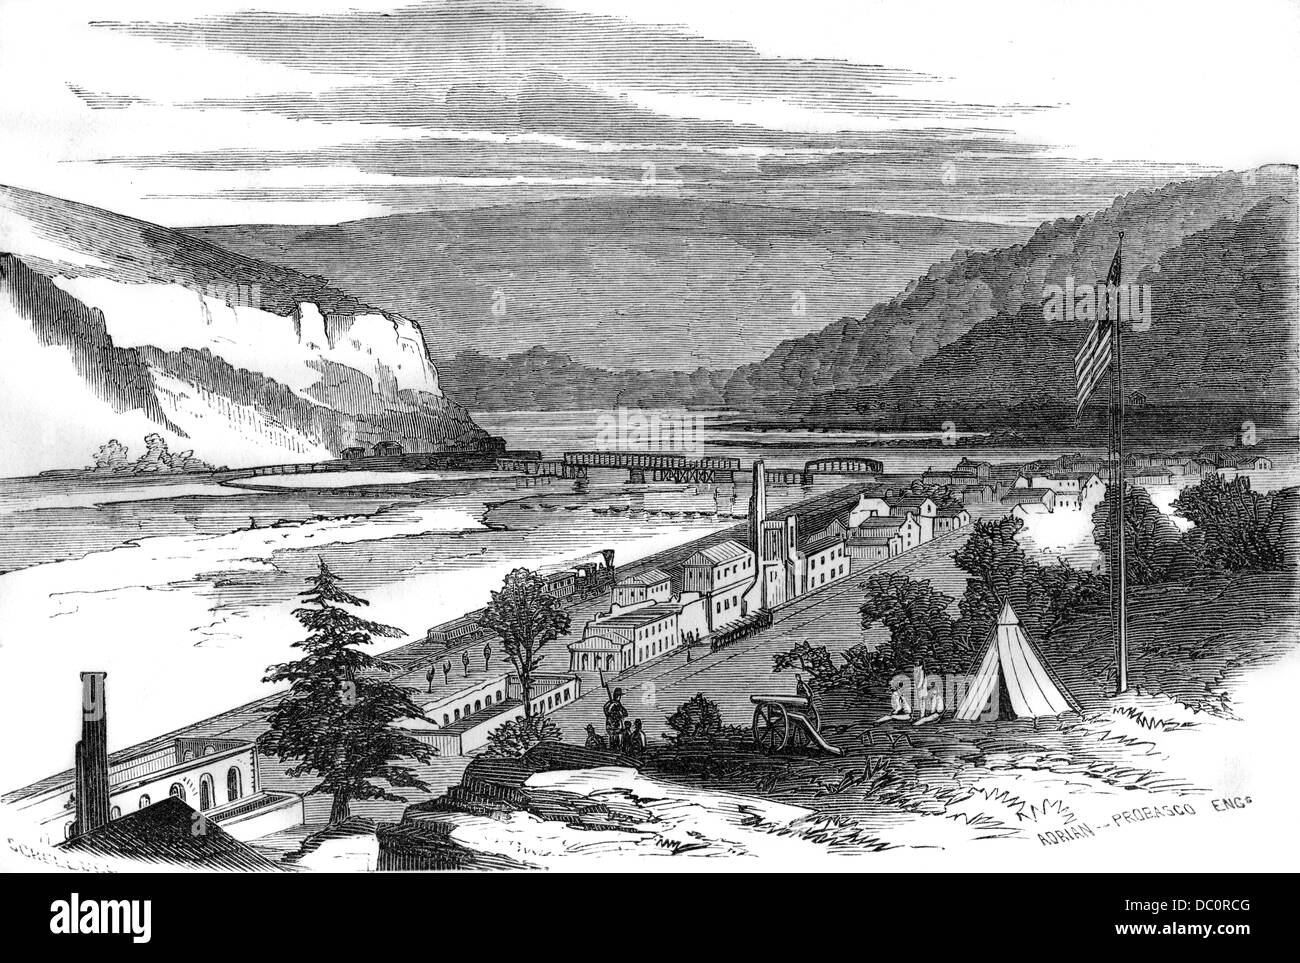 1860s VIEW OF HARPER'S FERRY AFTER DEMOLITION OF GOVERNMENT BUILDINGS UNION TROOPS ON HILL OVERLOOKING TOWN VIRGINIA USA Stock Photo